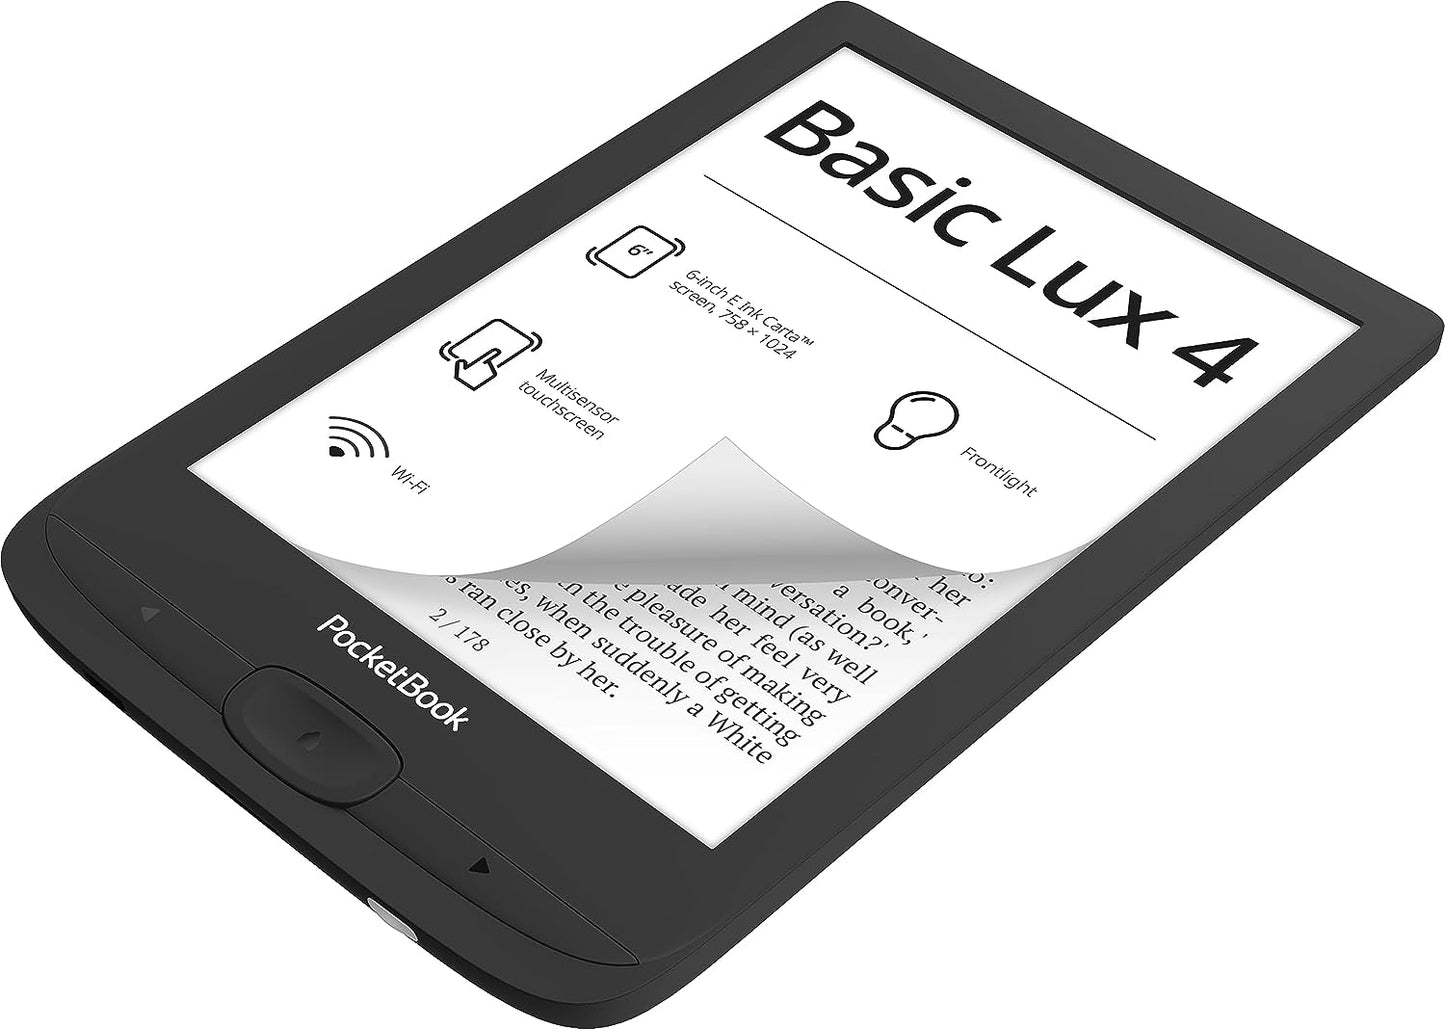 Pocketbook Basic Lux 4 e-reader with Touchscreen